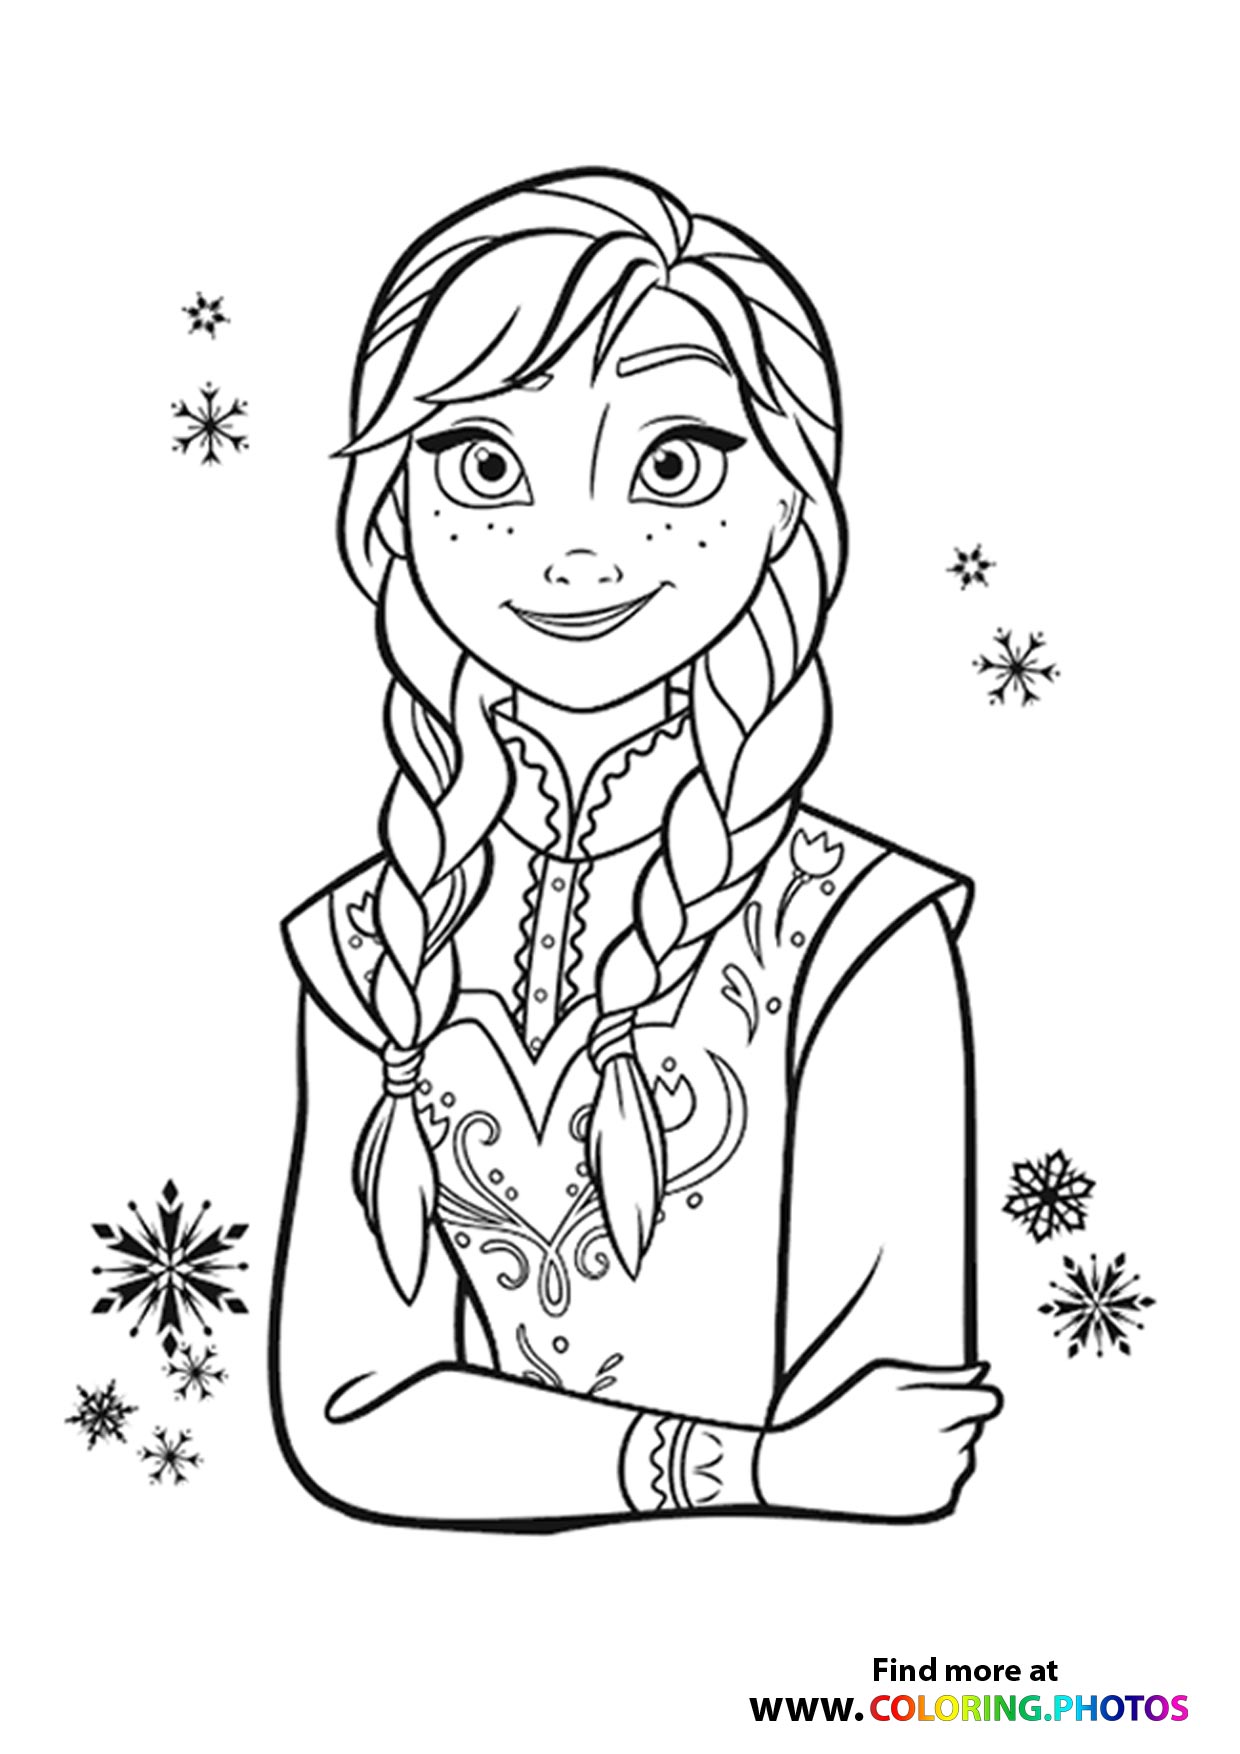 encanto-coloring-pages-free-printable